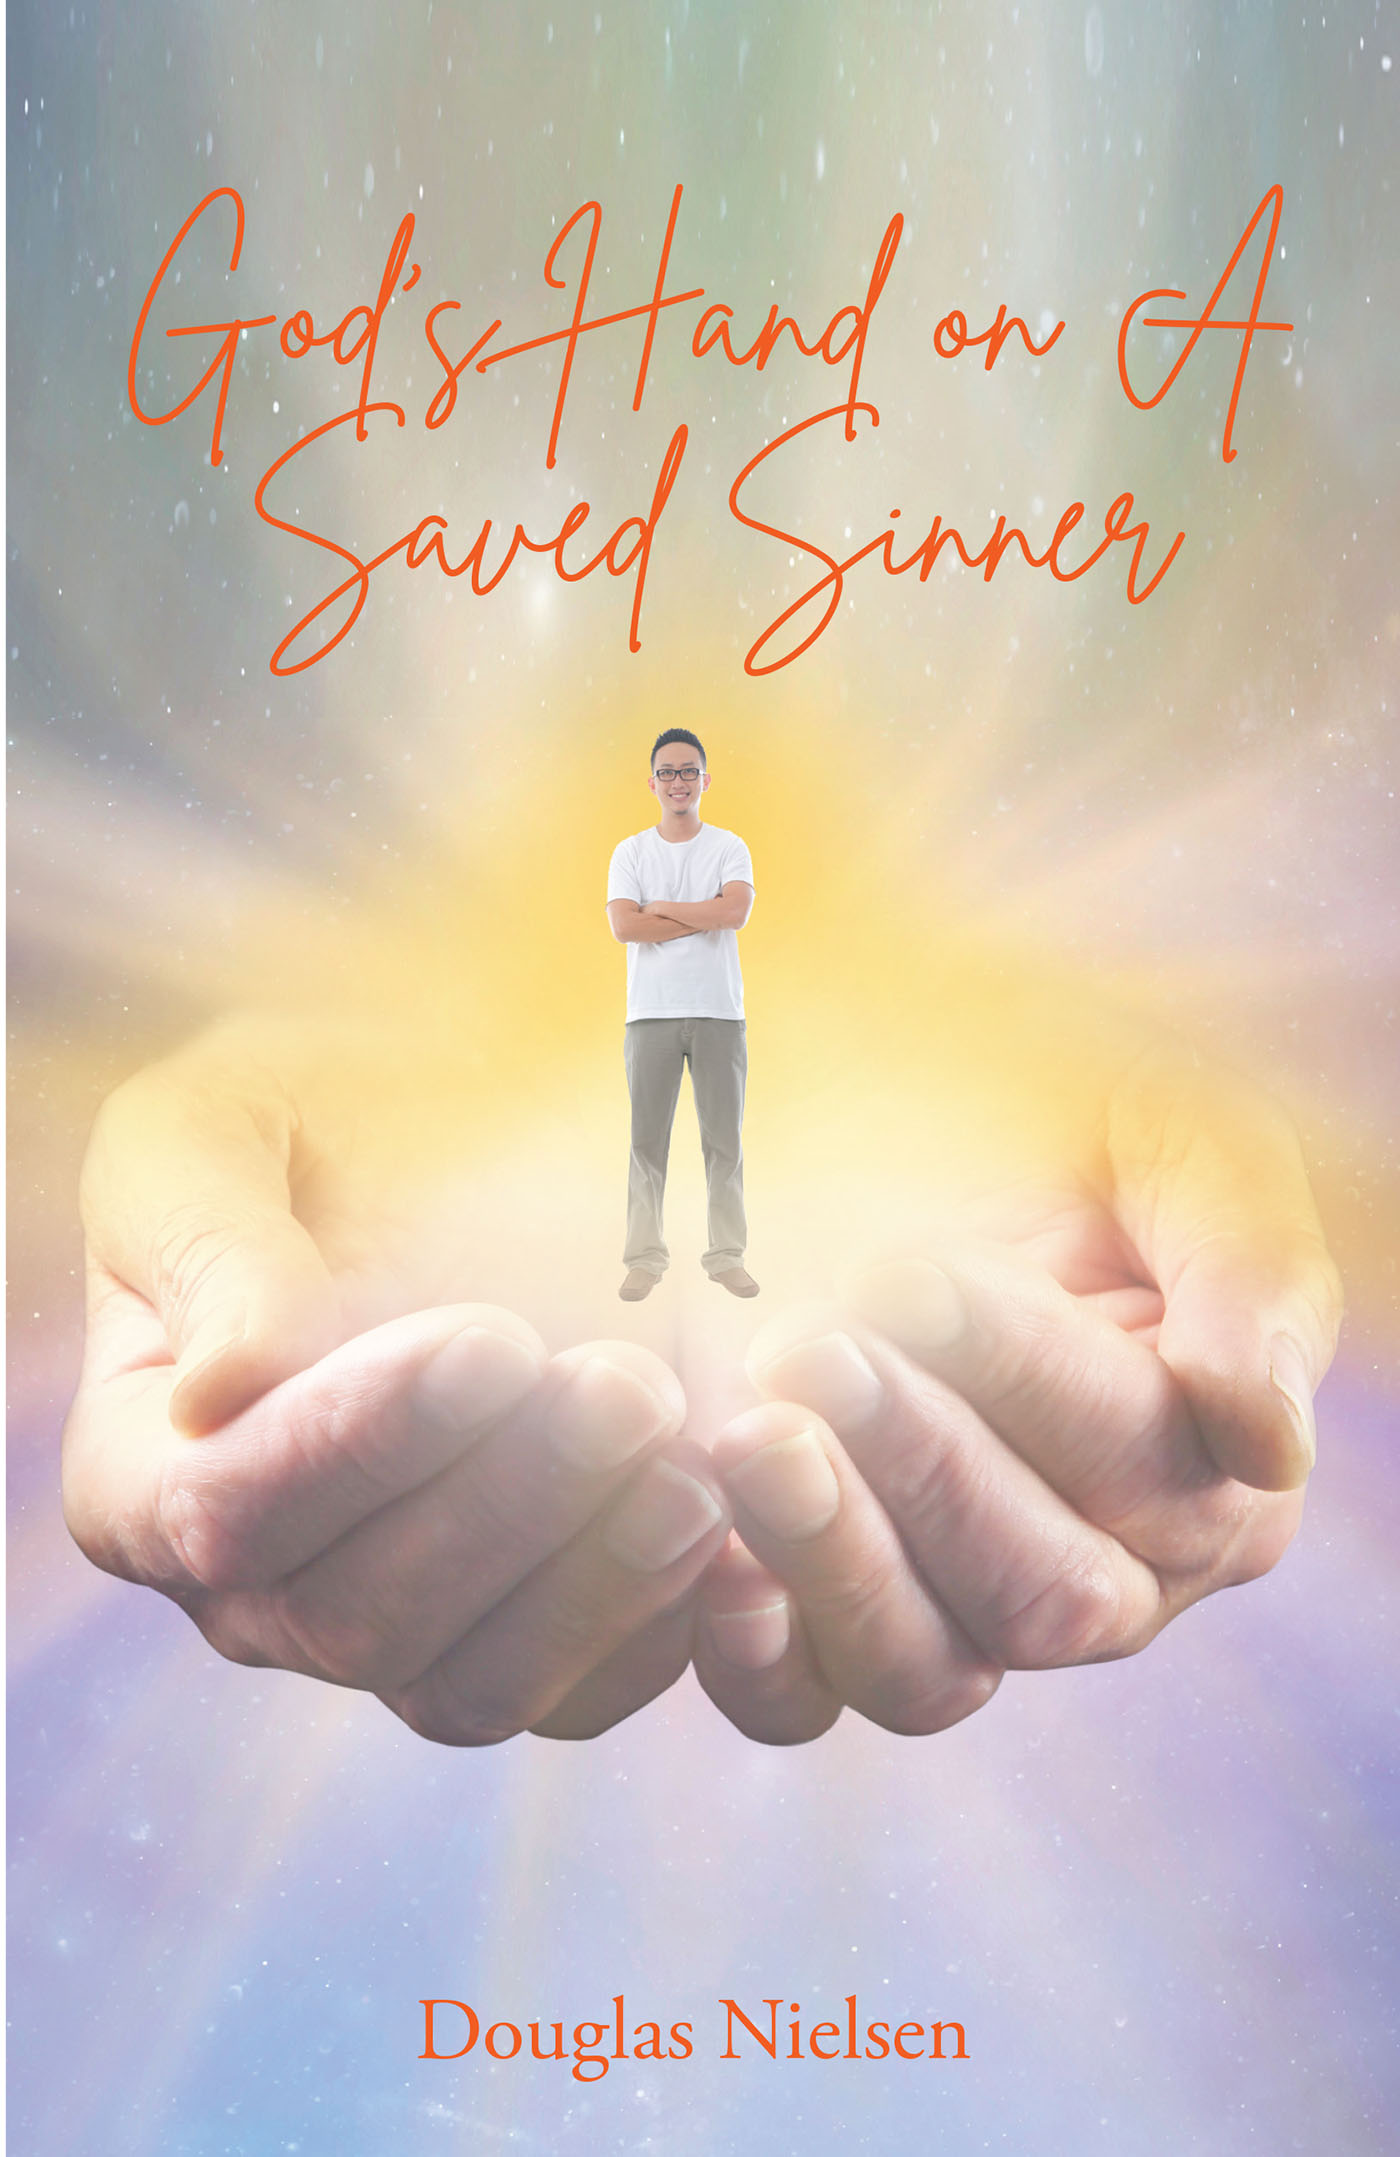 Douglas Nielsen’s Newly Released “God’s Hand on A Saved Sinner,” is a Thoughtful Look Back on the Ways in Which God Moved Within One Man’s Journey